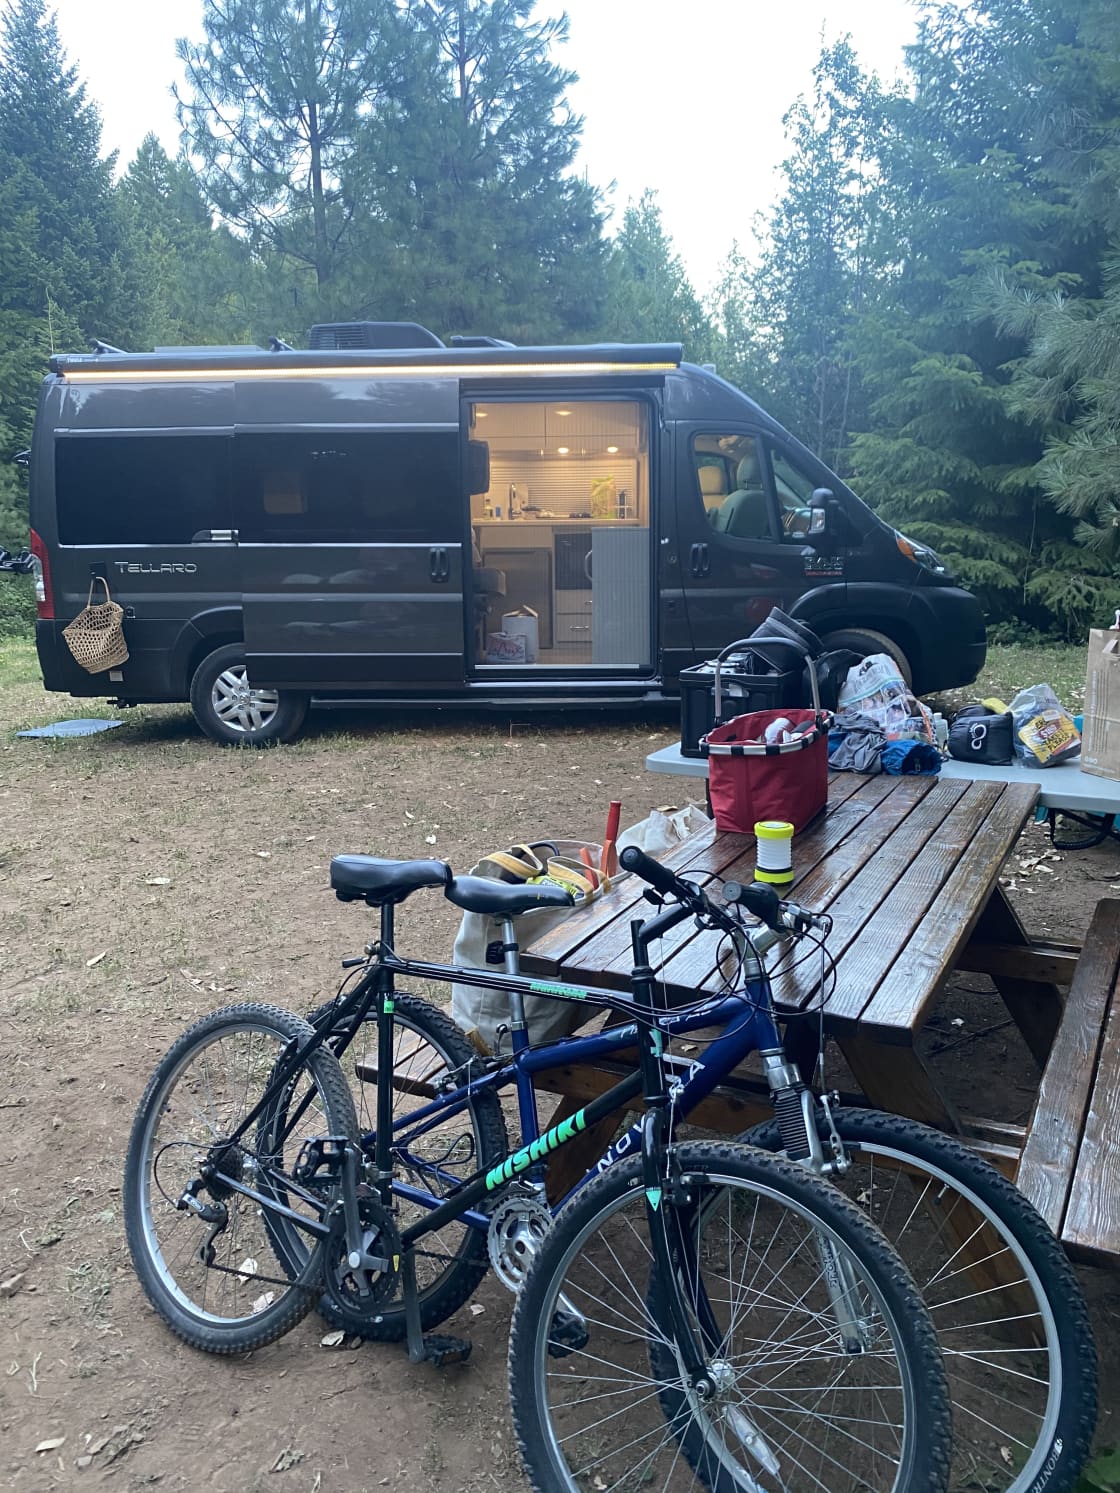 At the first campsite